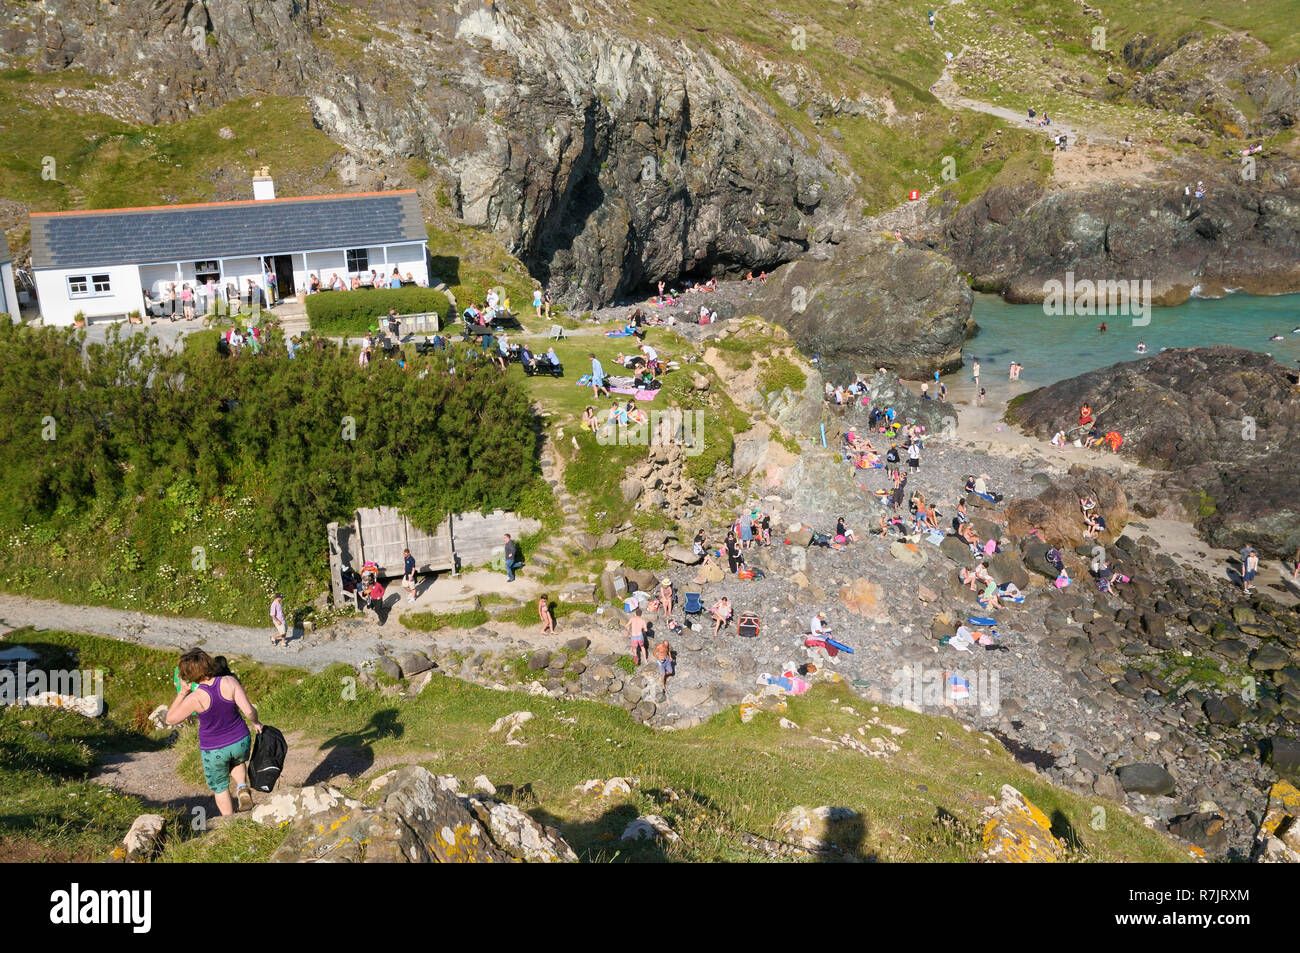 Tourists sunbathing on the rocky shores of Kynance Cove next to the cafe, Cornwall, England, UK Stock Photo